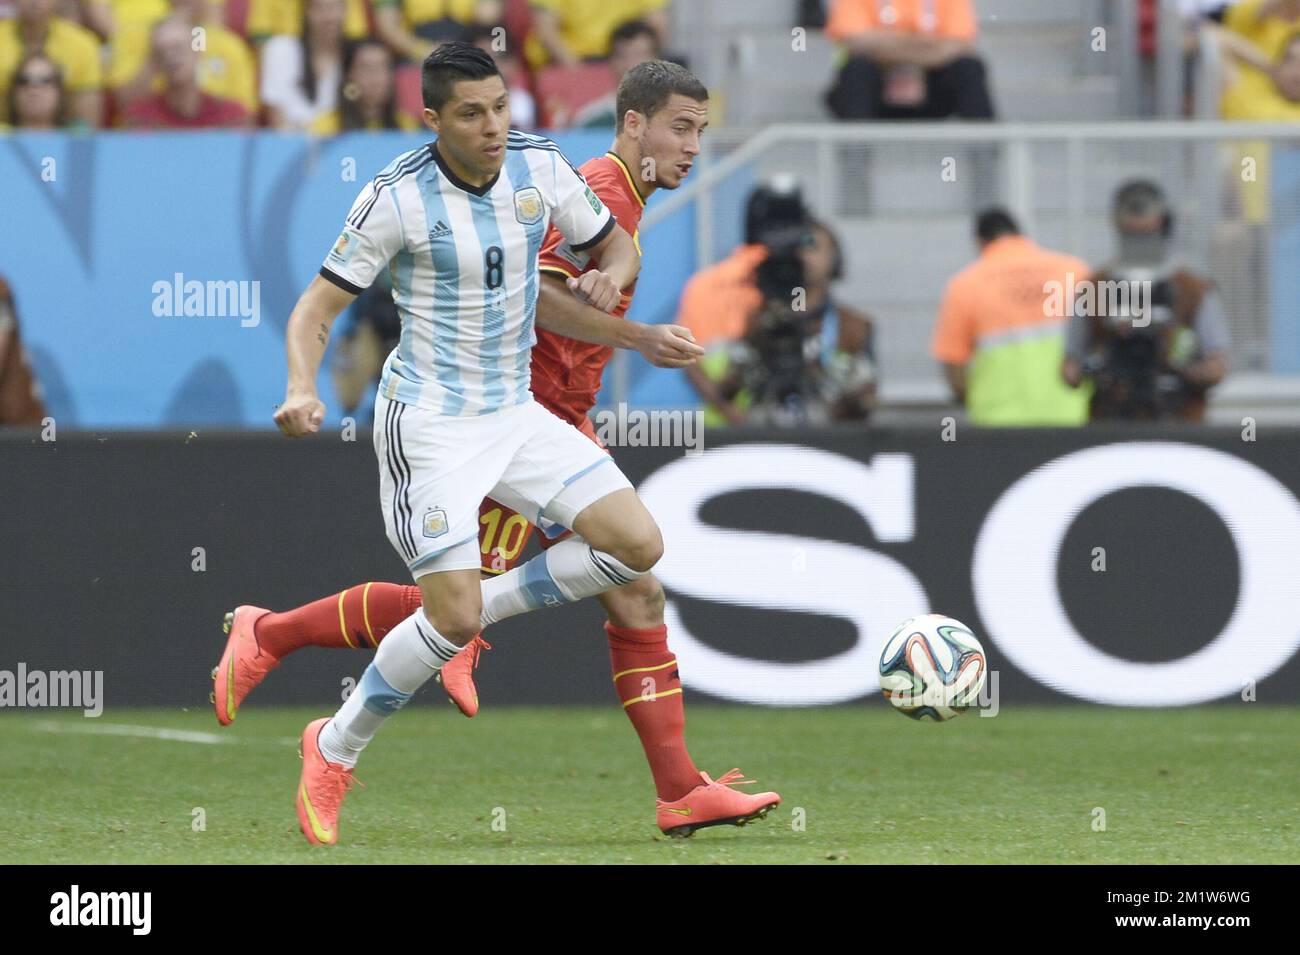 Argentina's Enzo Perez and Belgium's Eden Hazard fight for the ball during the quarter final match between Belgian national soccer team Red Devils and Argentina, in Estadio Nacional Mane Garrincha, in Brasilia, Brazil, during the 2014 FIFA World Cup, Saturday 05 July 2014.  BELGA PHOTO DIRK WAEM Stock Photo